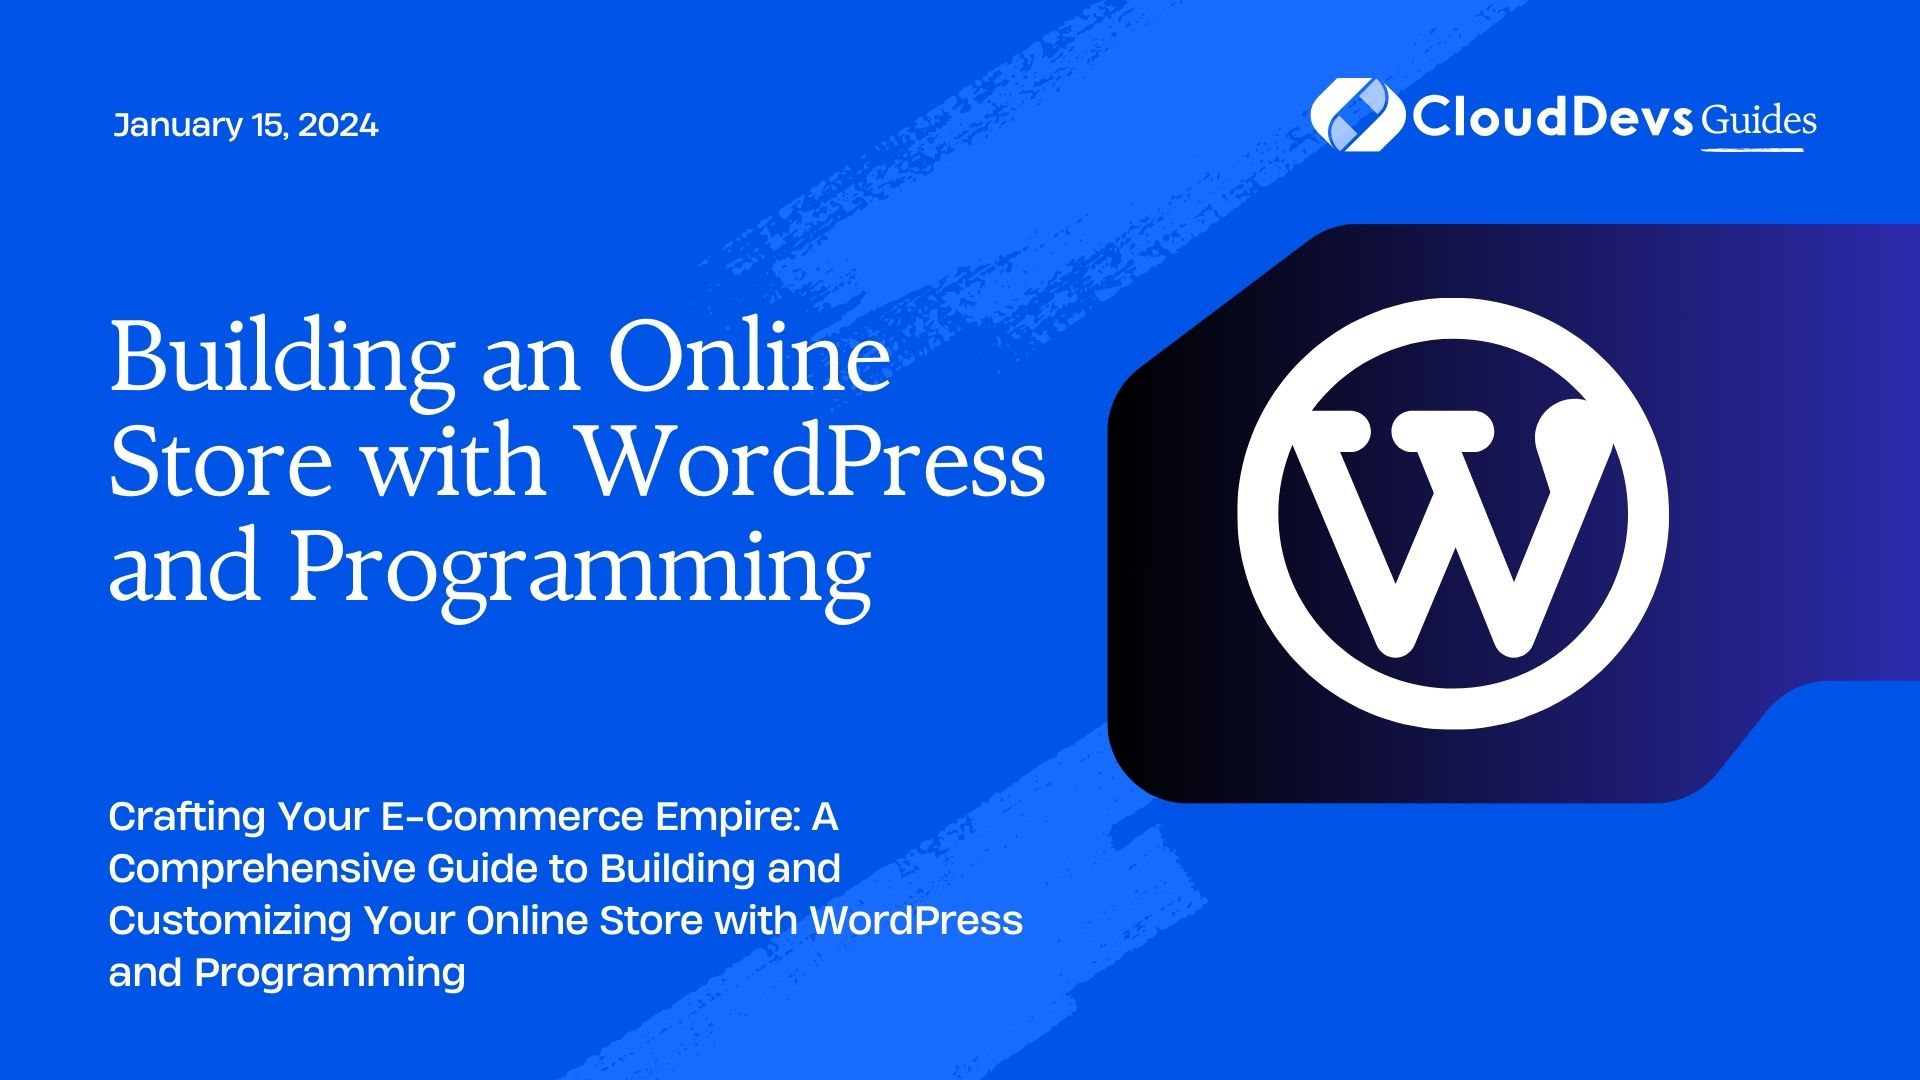 Building an Online Store with WordPress and Programming